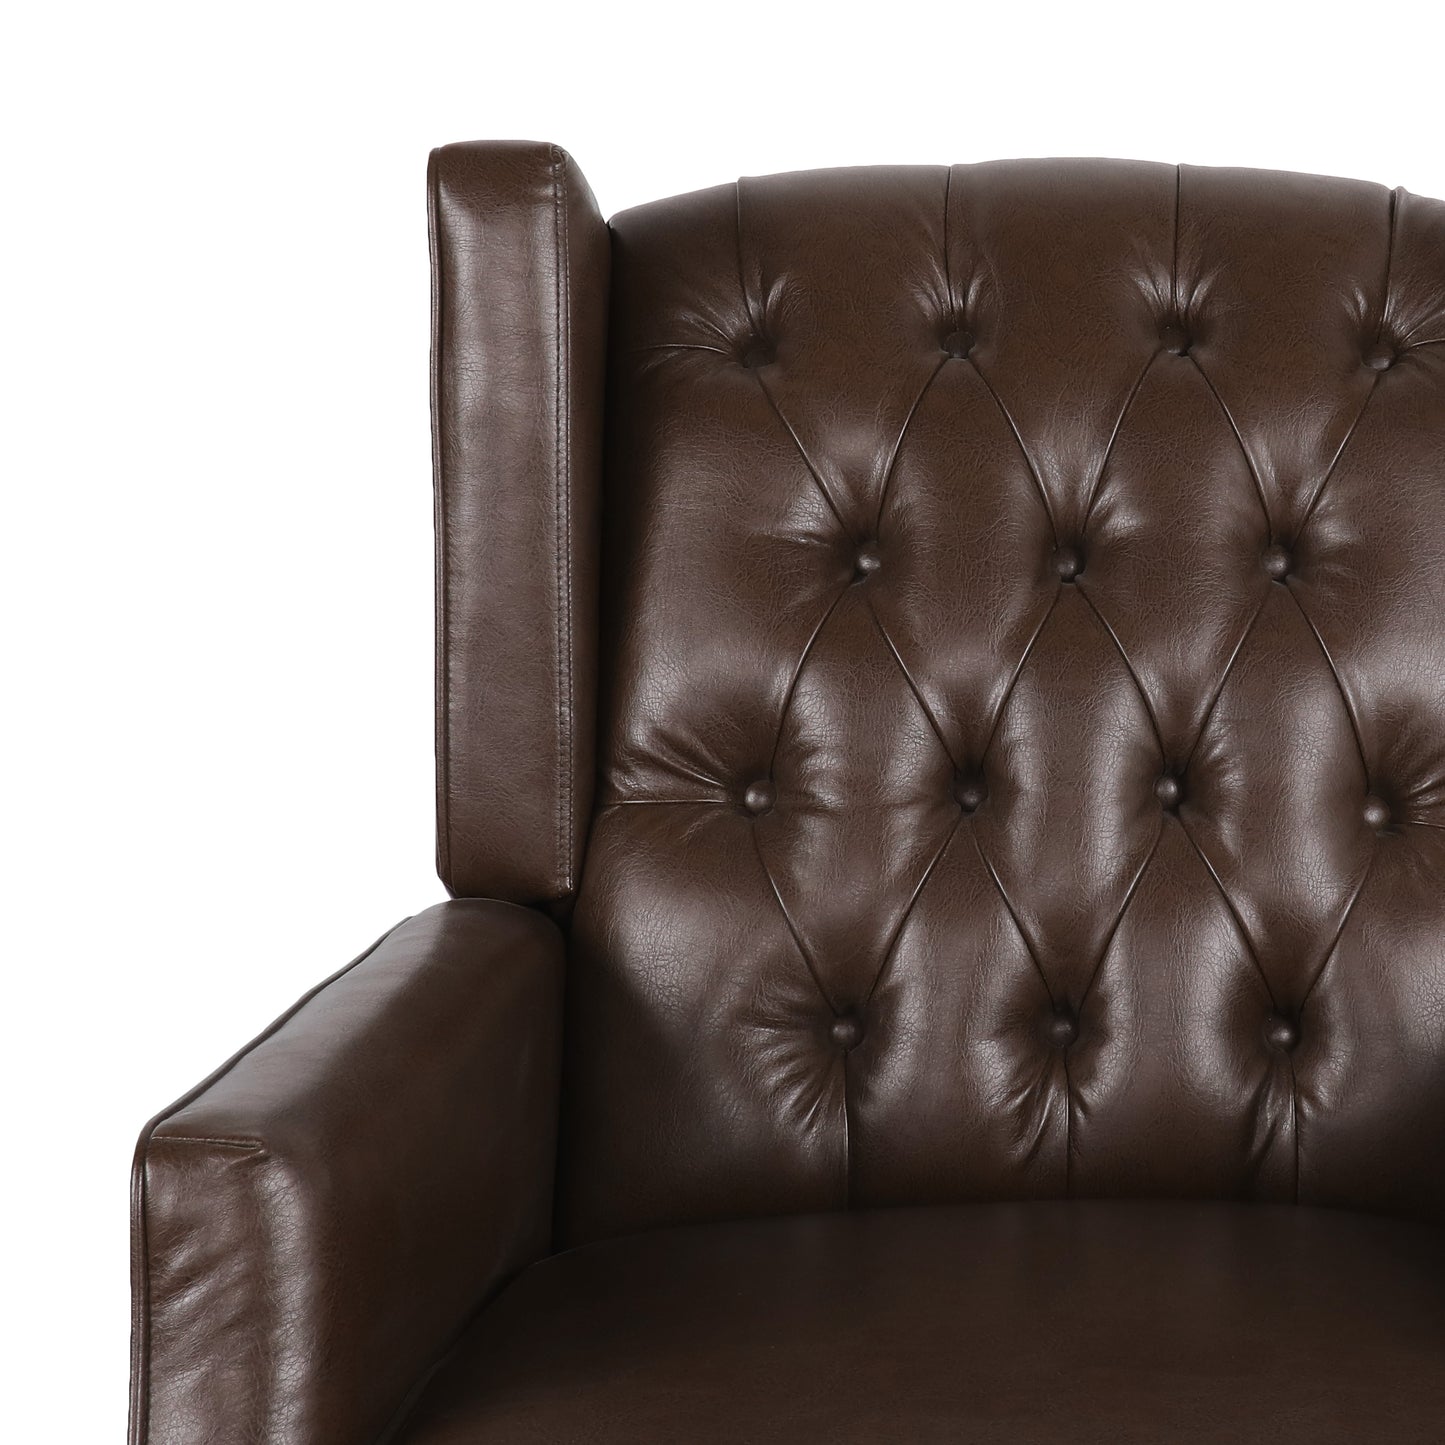 Amedou Contemporary Faux Leather Tufted Wingback Rocking Chair